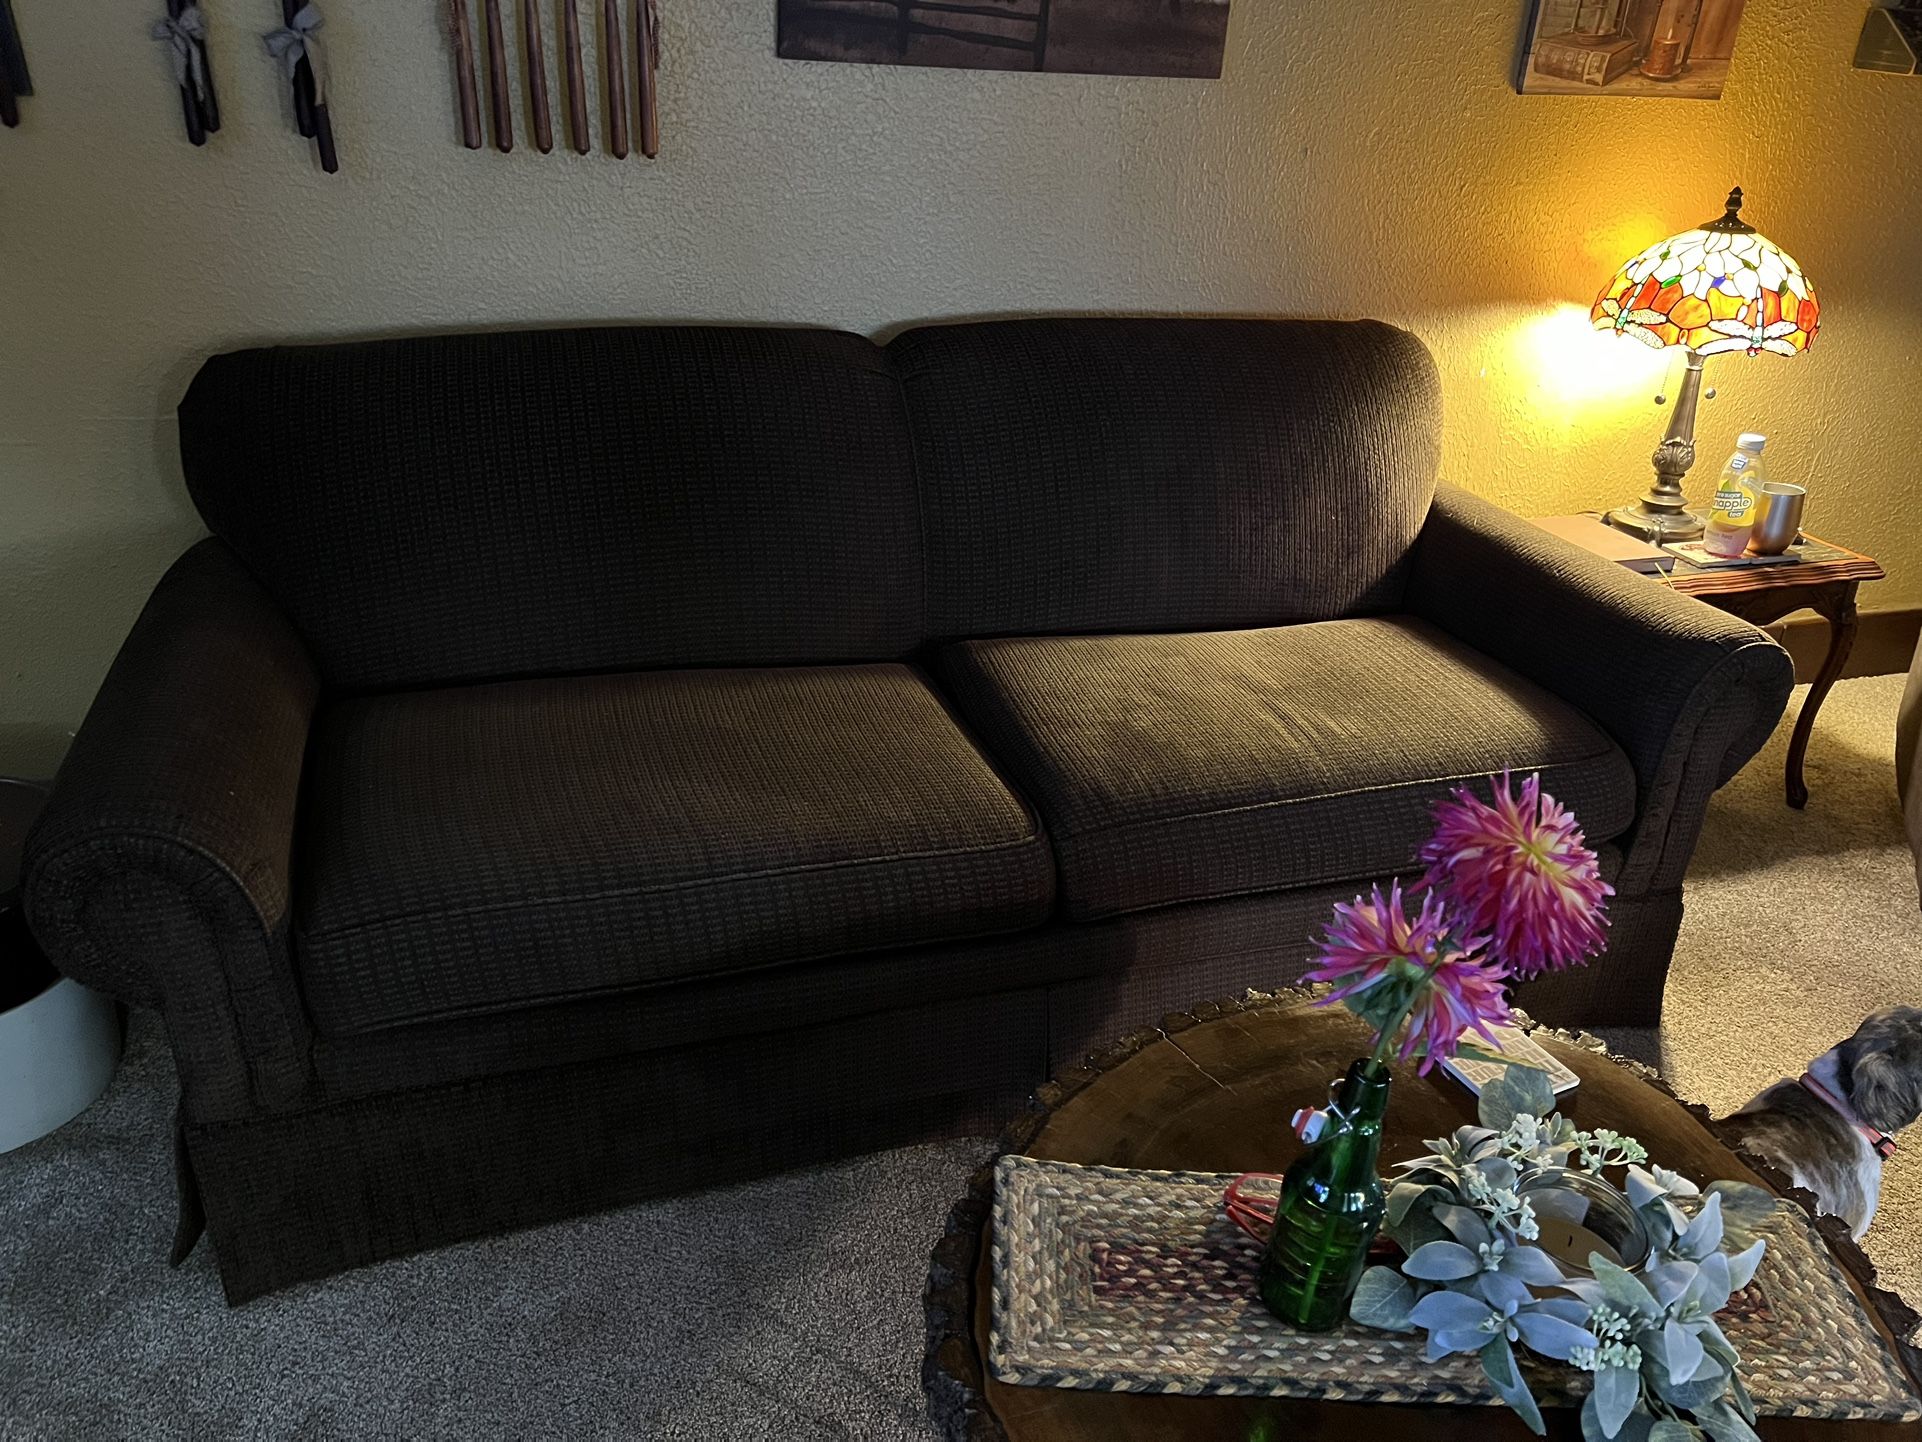 Couch And Rocker Loveseat. Great Condition. No Dog Hair. Or Best Offer!